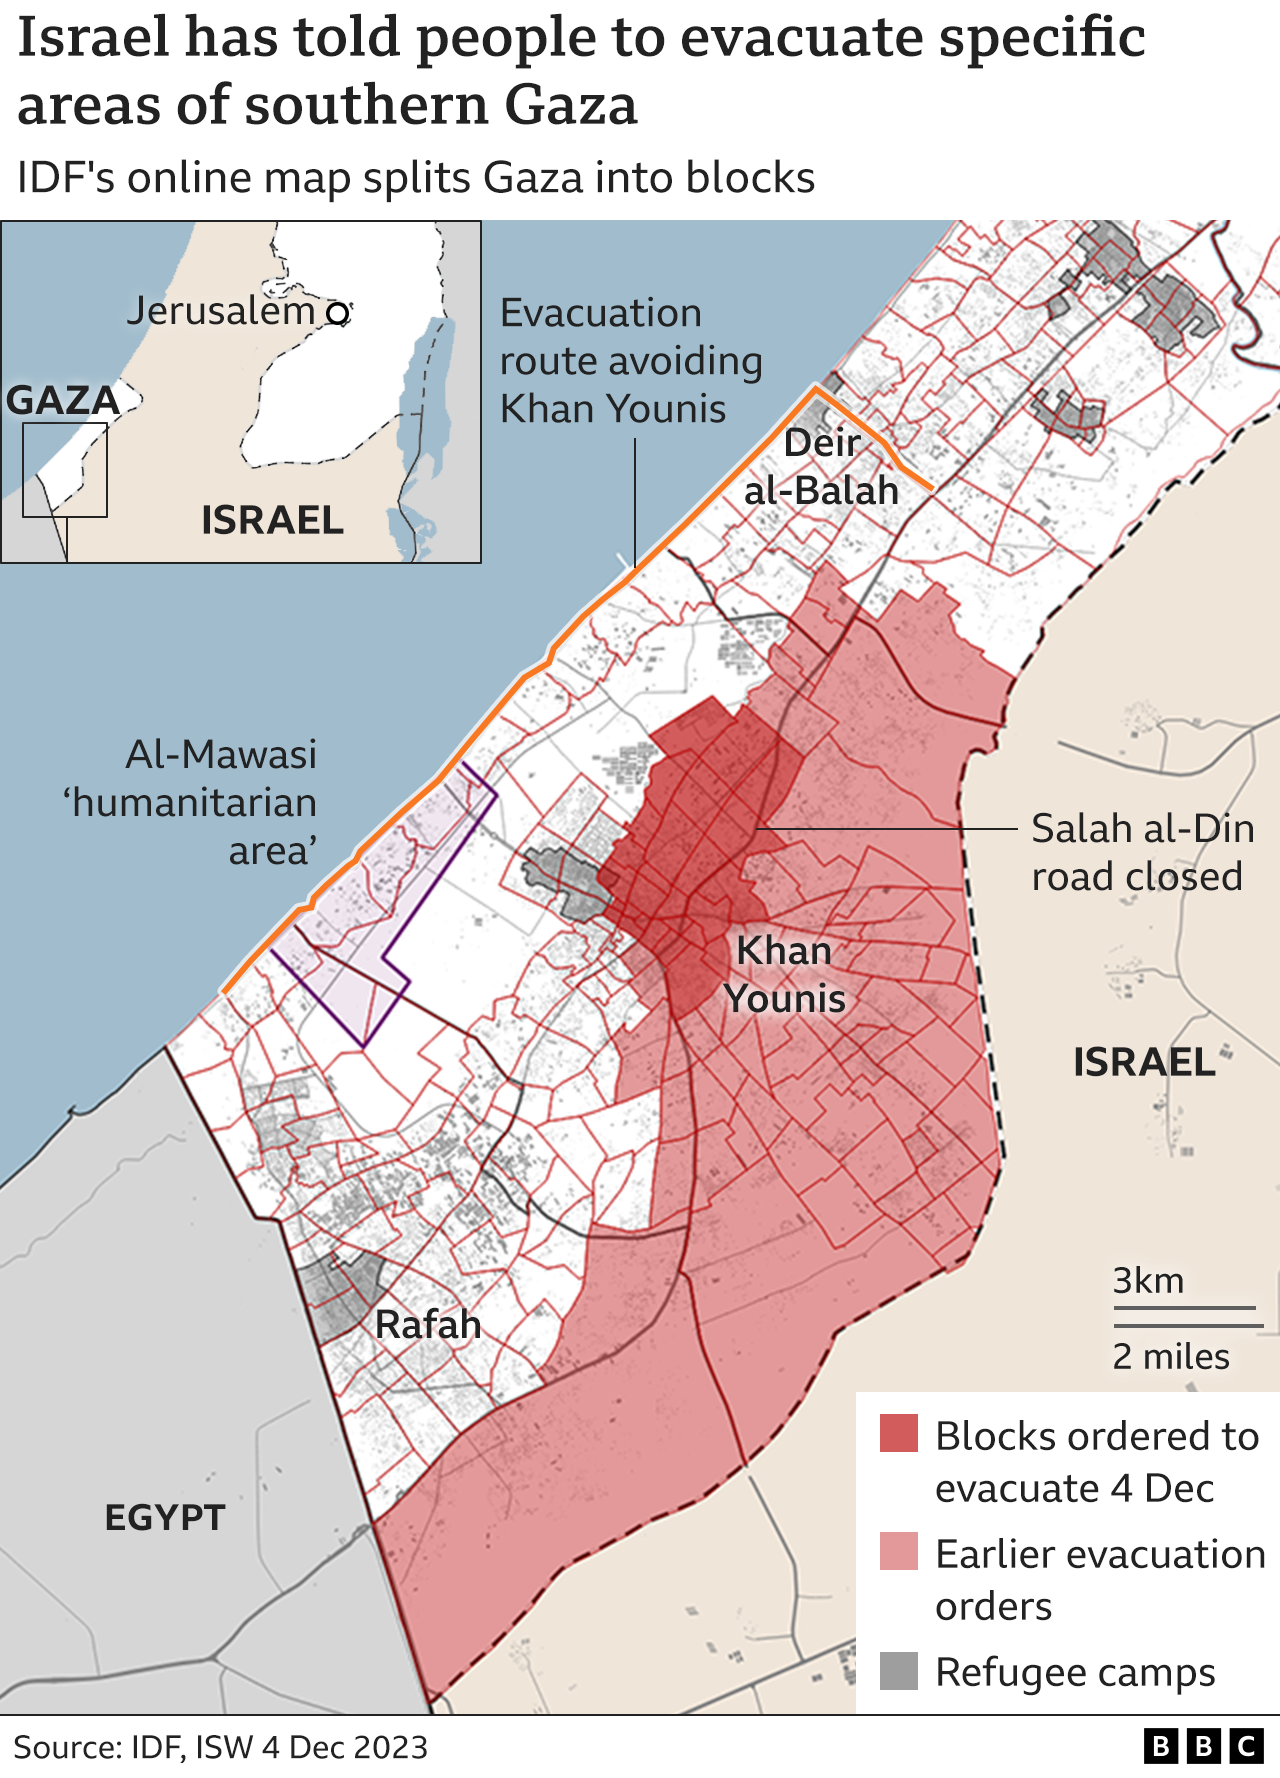 Map showing Israeli-declared evacuation zones in southern Gaza (4 December 2023)